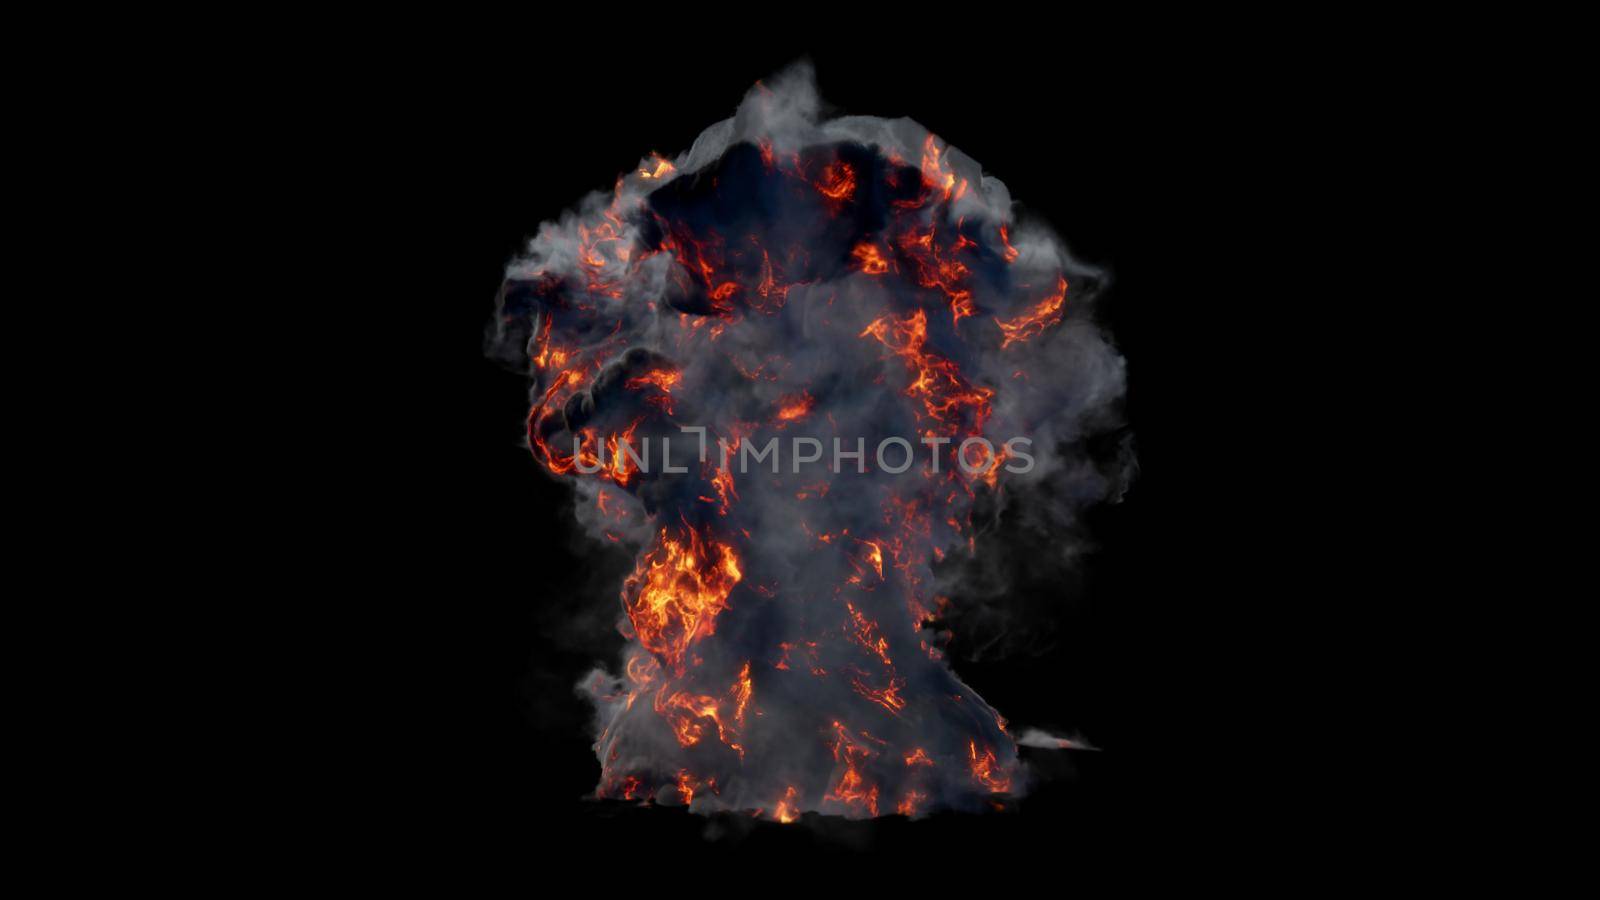 An unusual explosion, fire swirling along with black smoke. 3D Rendering by designprojects